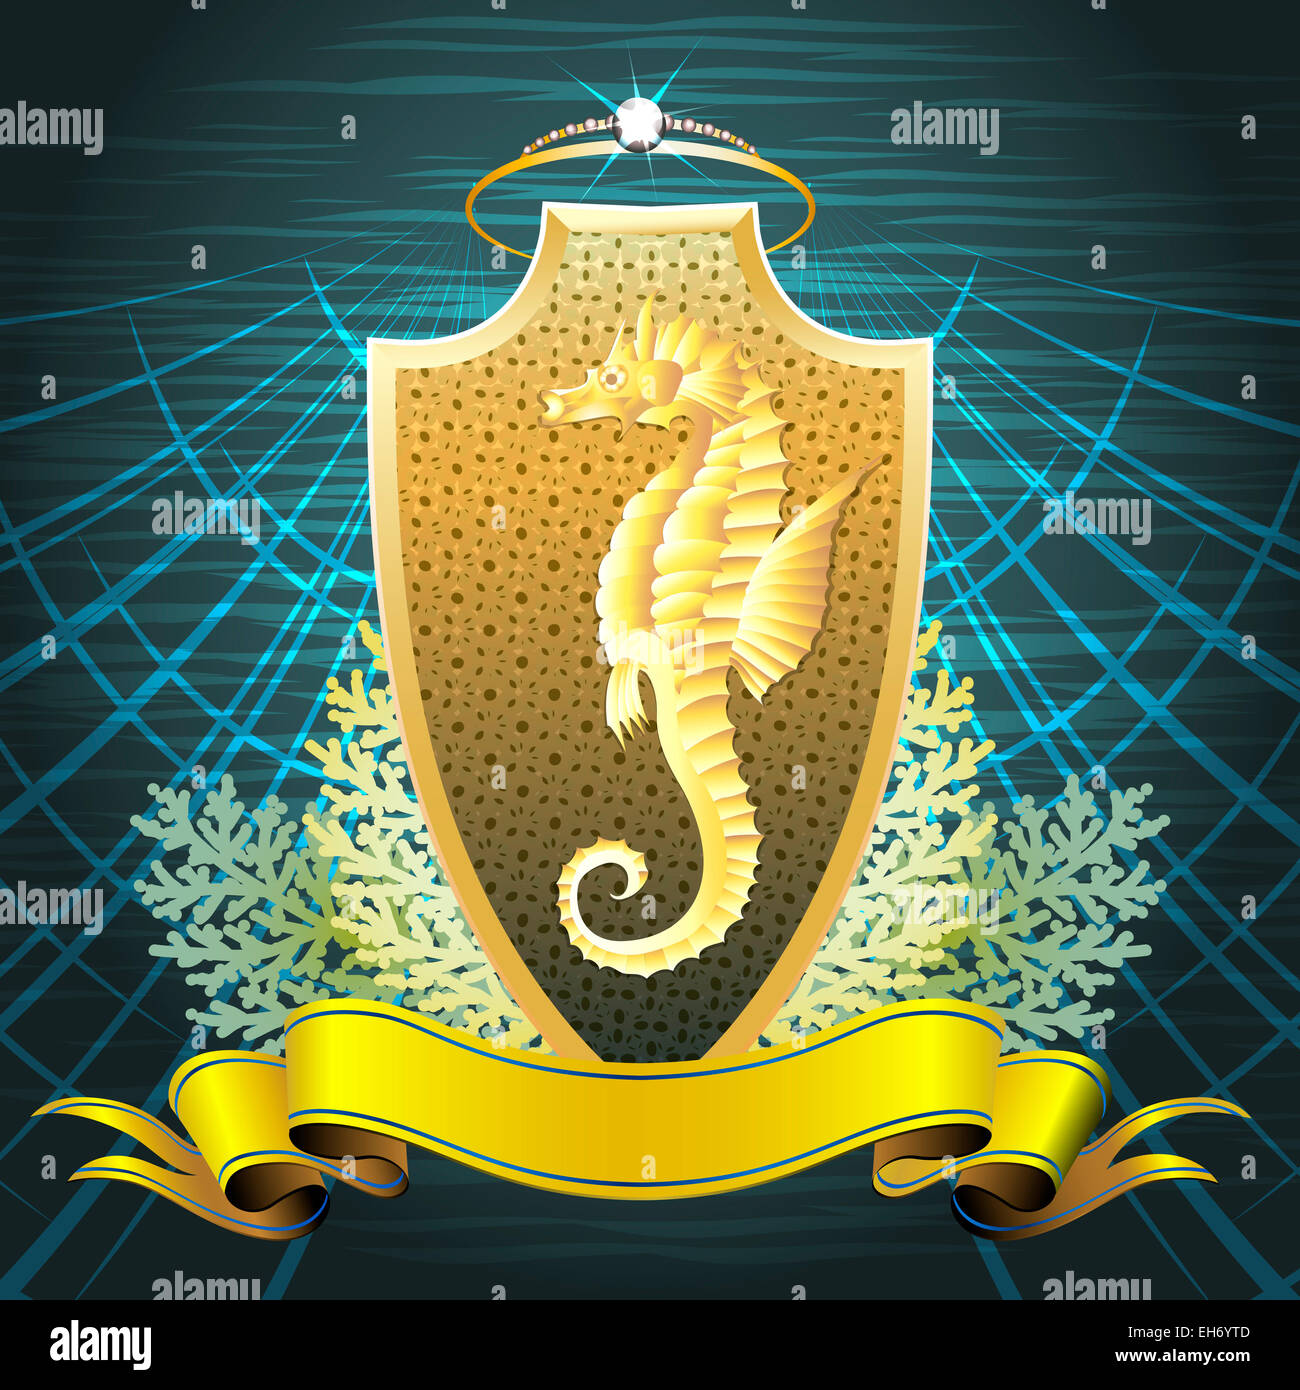 The golden seahorse shield with pearl crown, corals and amber banner against dark blue wavy background drawn in classic style Stock Photo